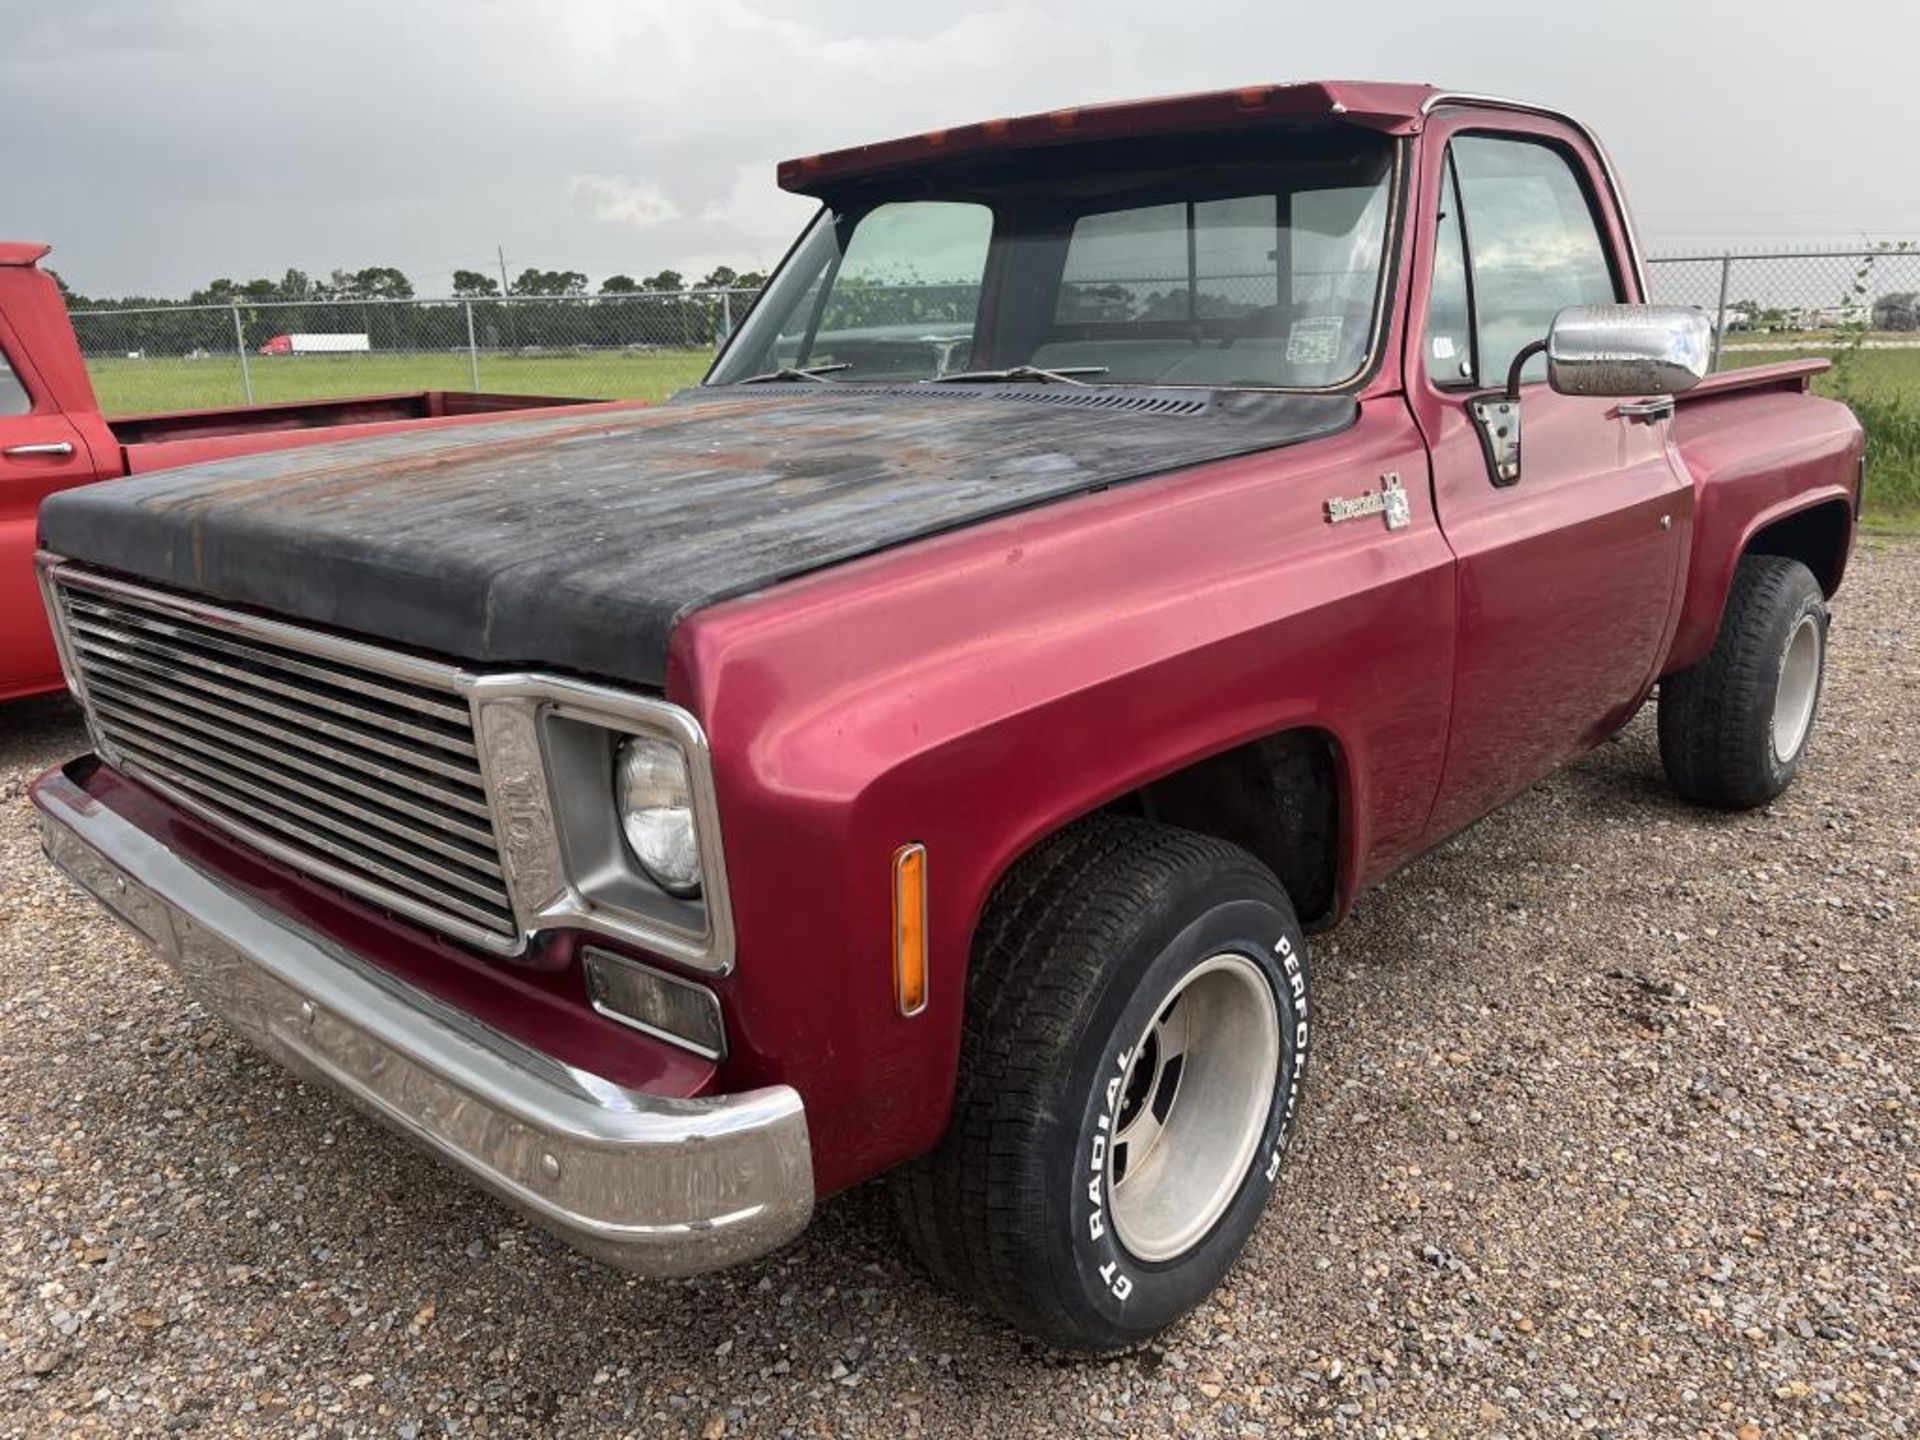 PROJECT: 1978 Chevrolet C10 Pickup